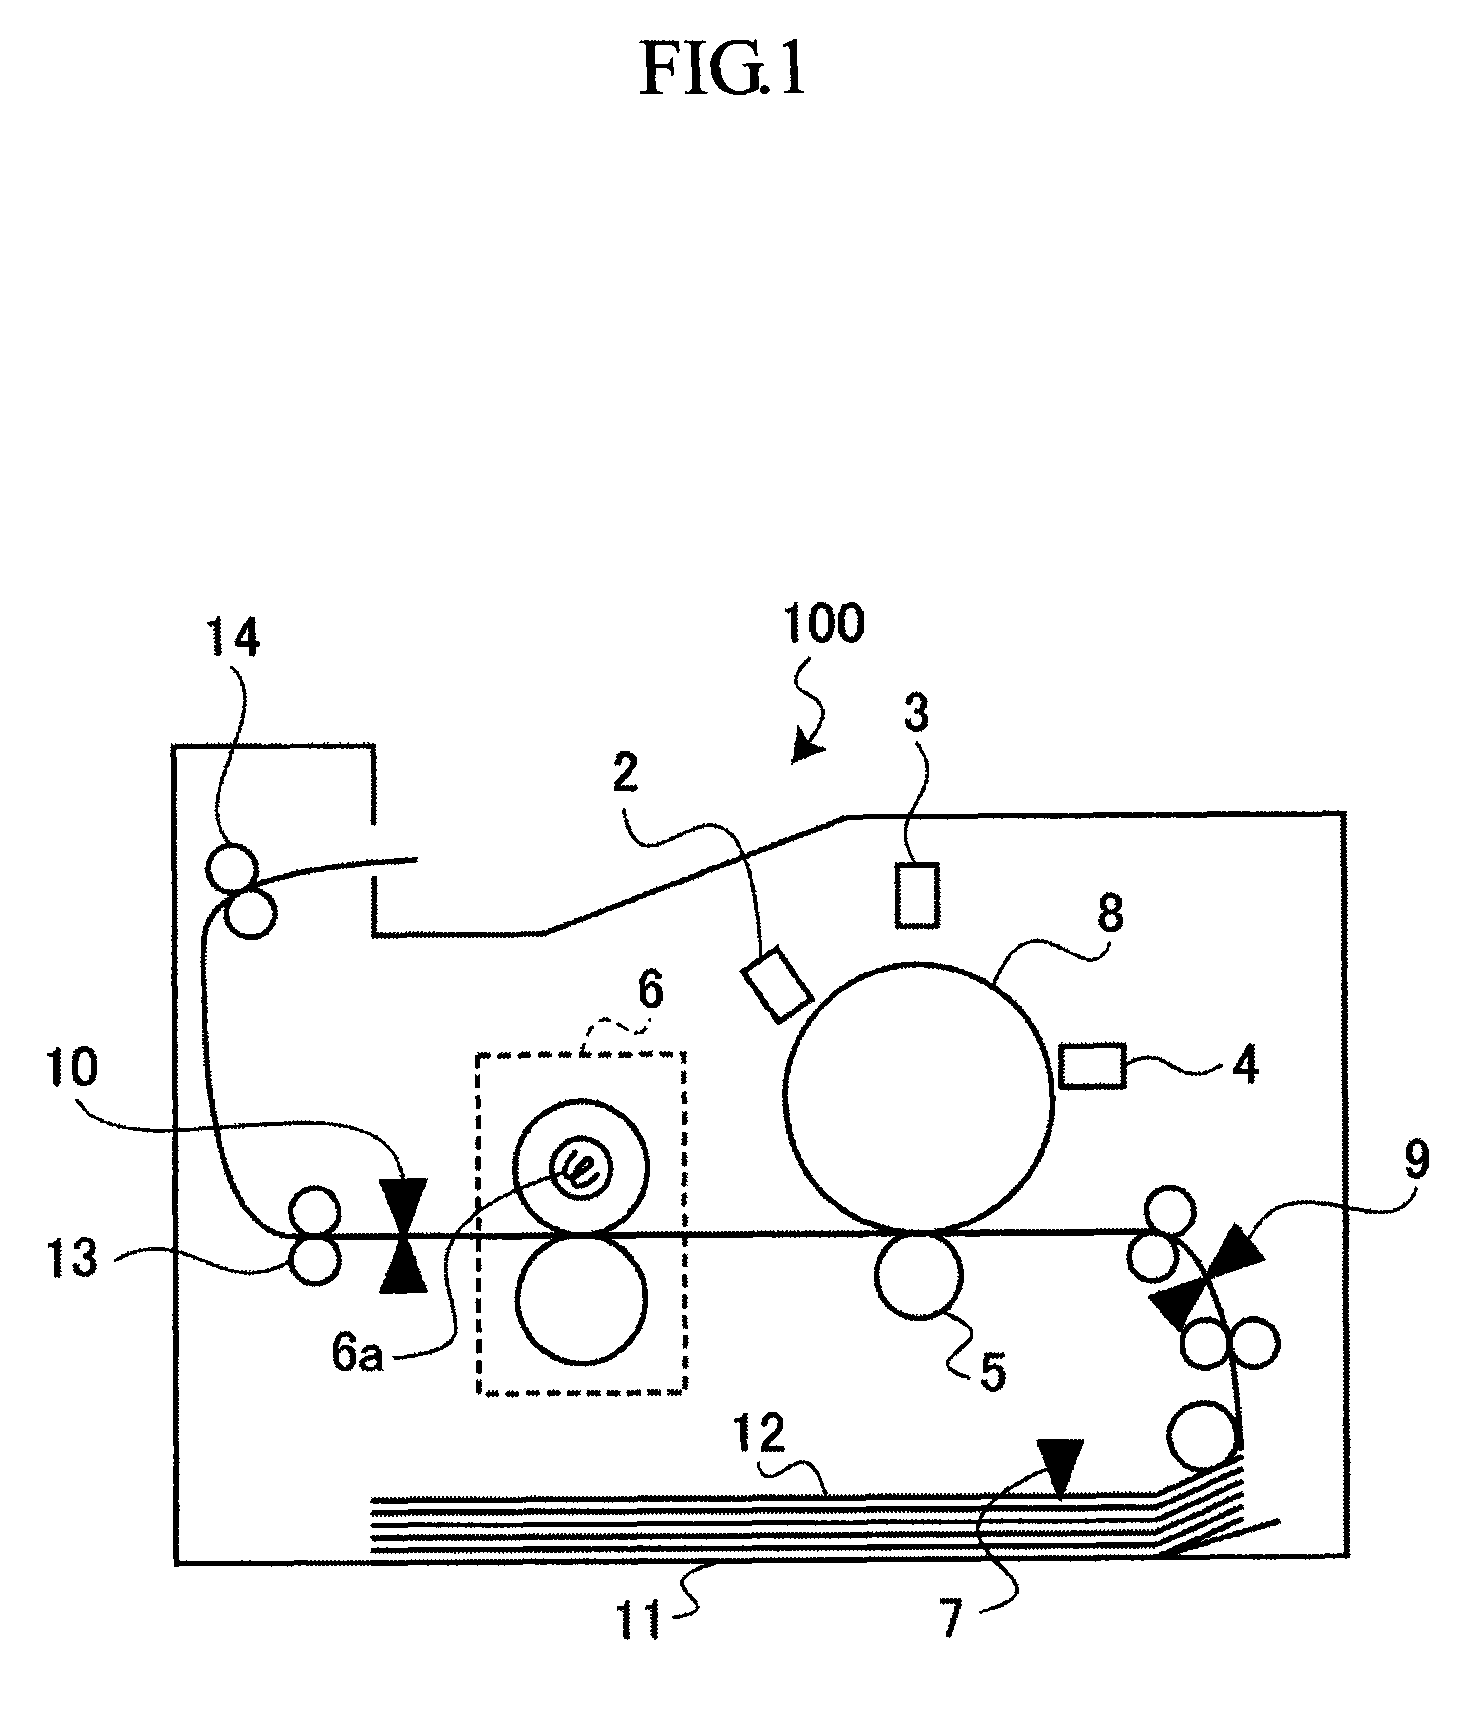 Image forming apparatus that uses fixing member temperature or thickness of recording medium to detect when to halt the rotation drive of a fixing member drive unit